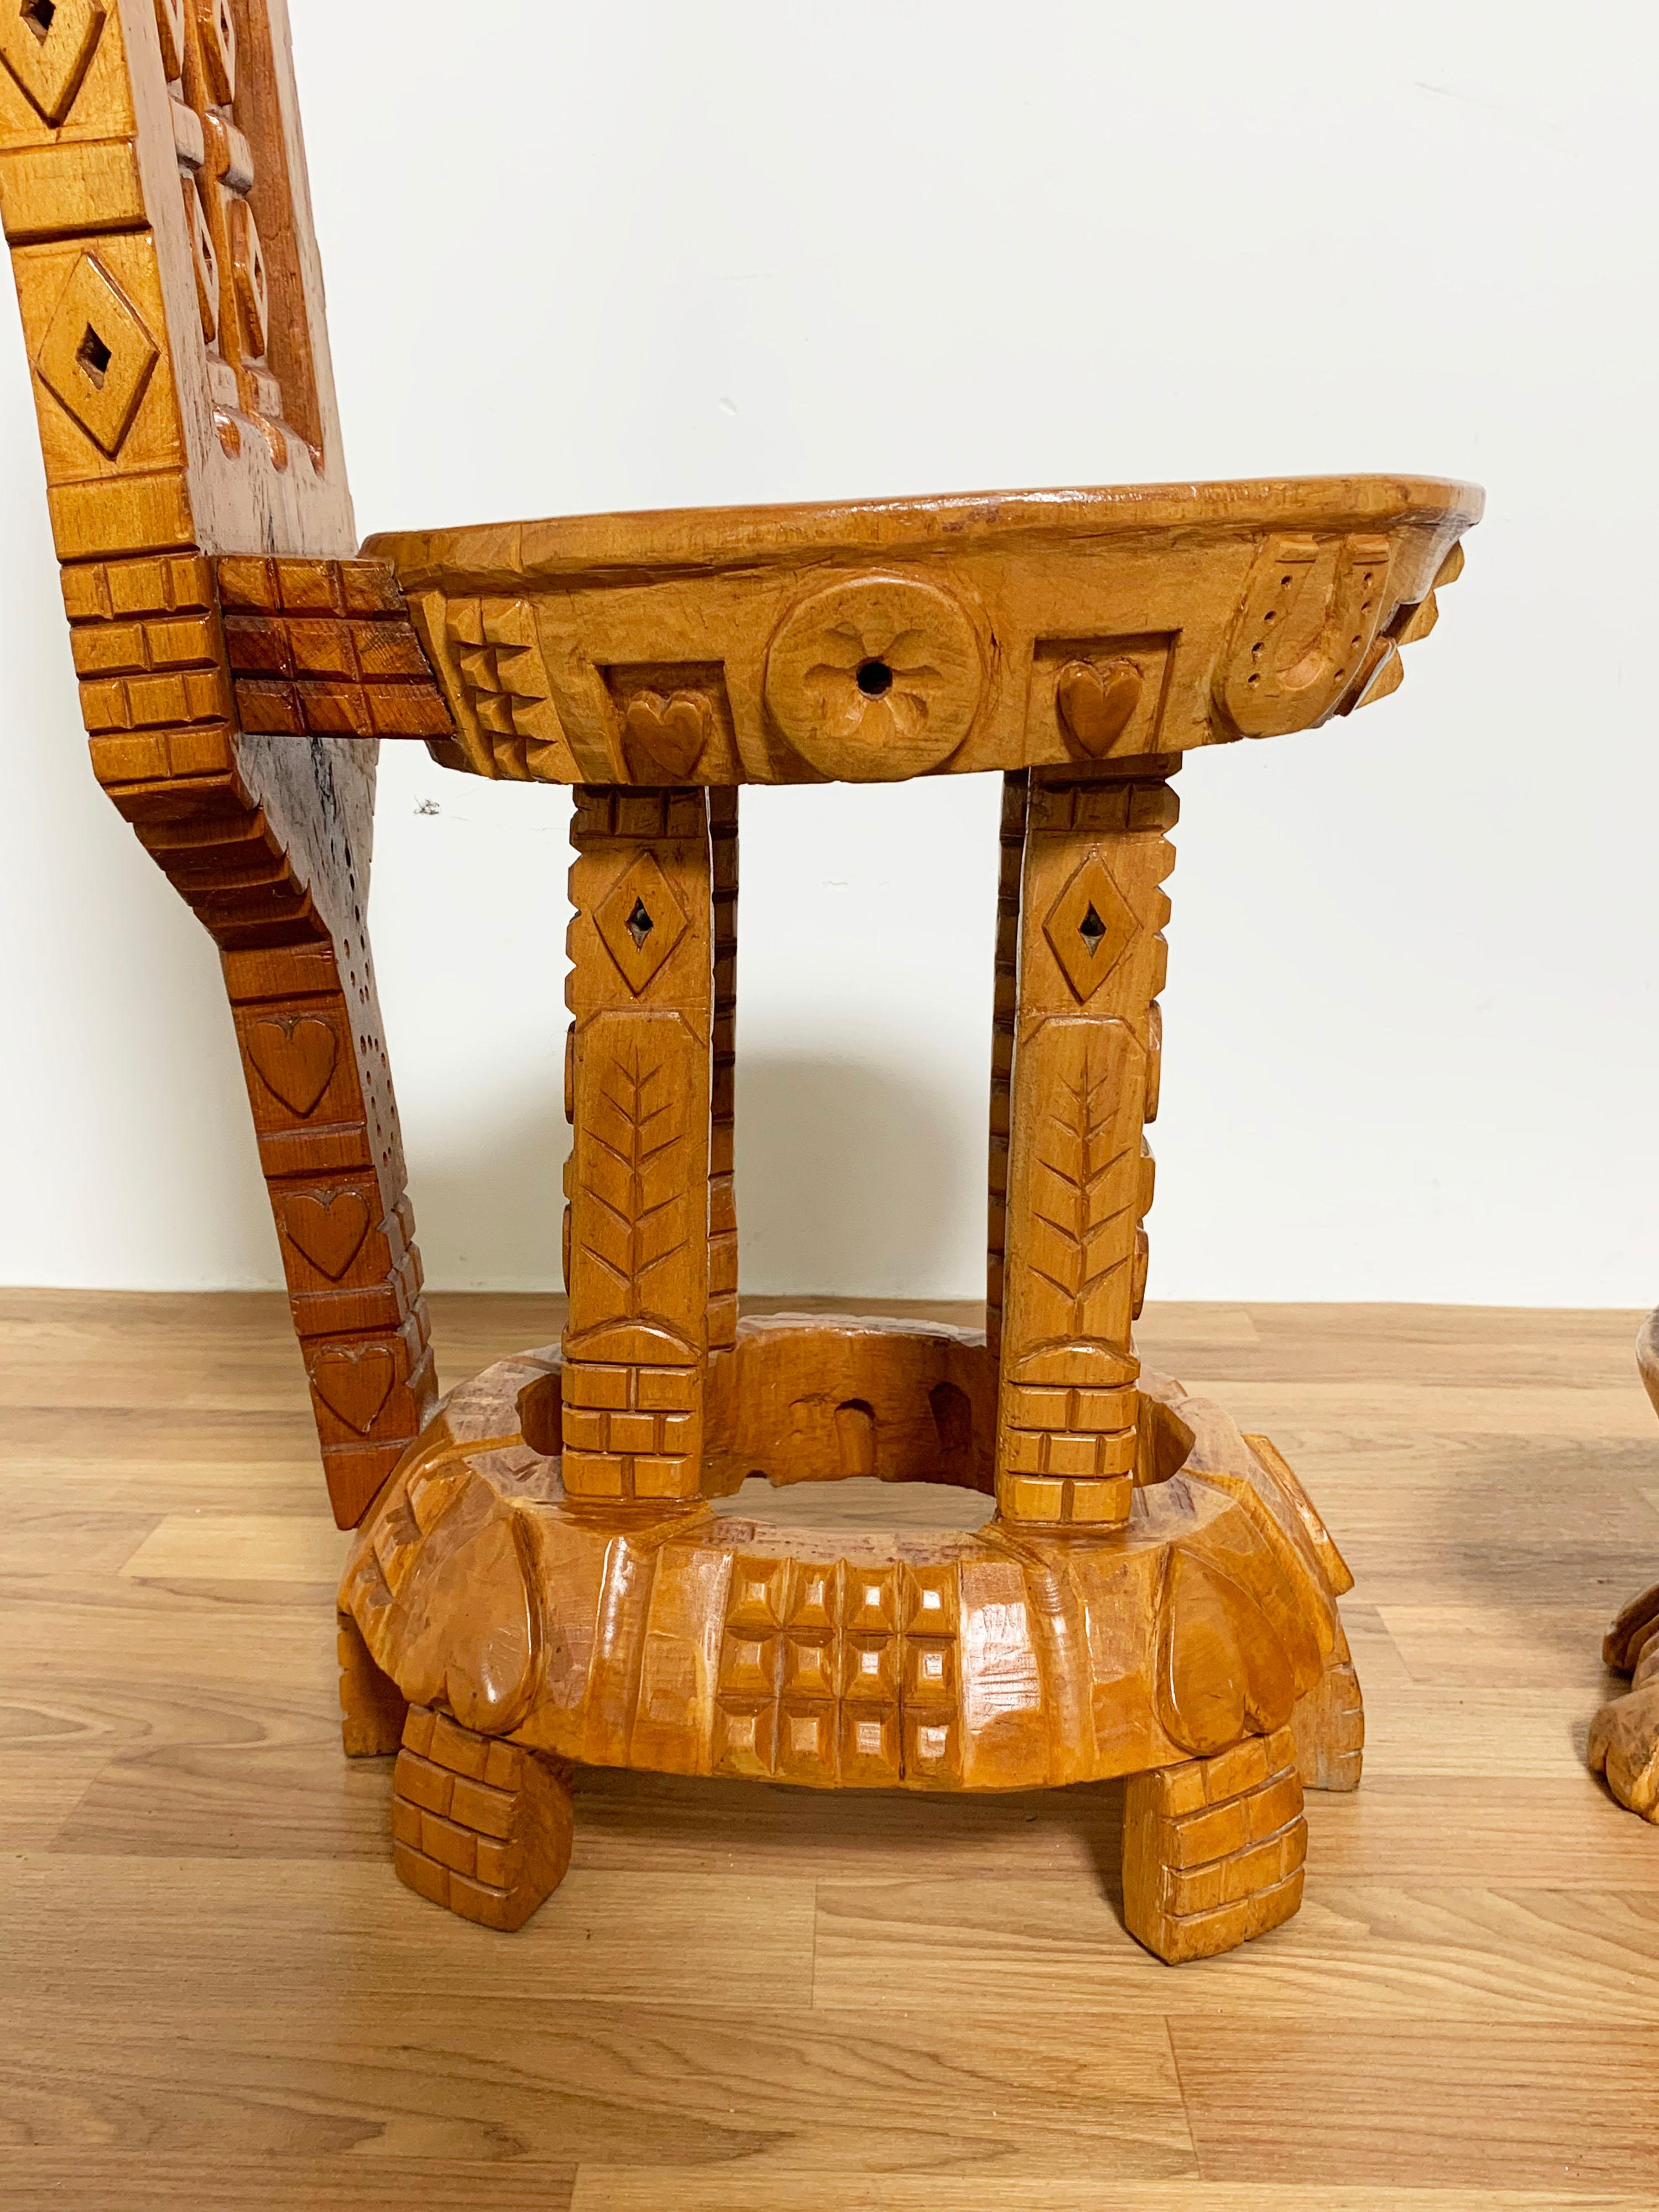 Hand-Carved Hand Carved Folk Art Chairs by Joseph Deveau, Circa 1950s For Sale